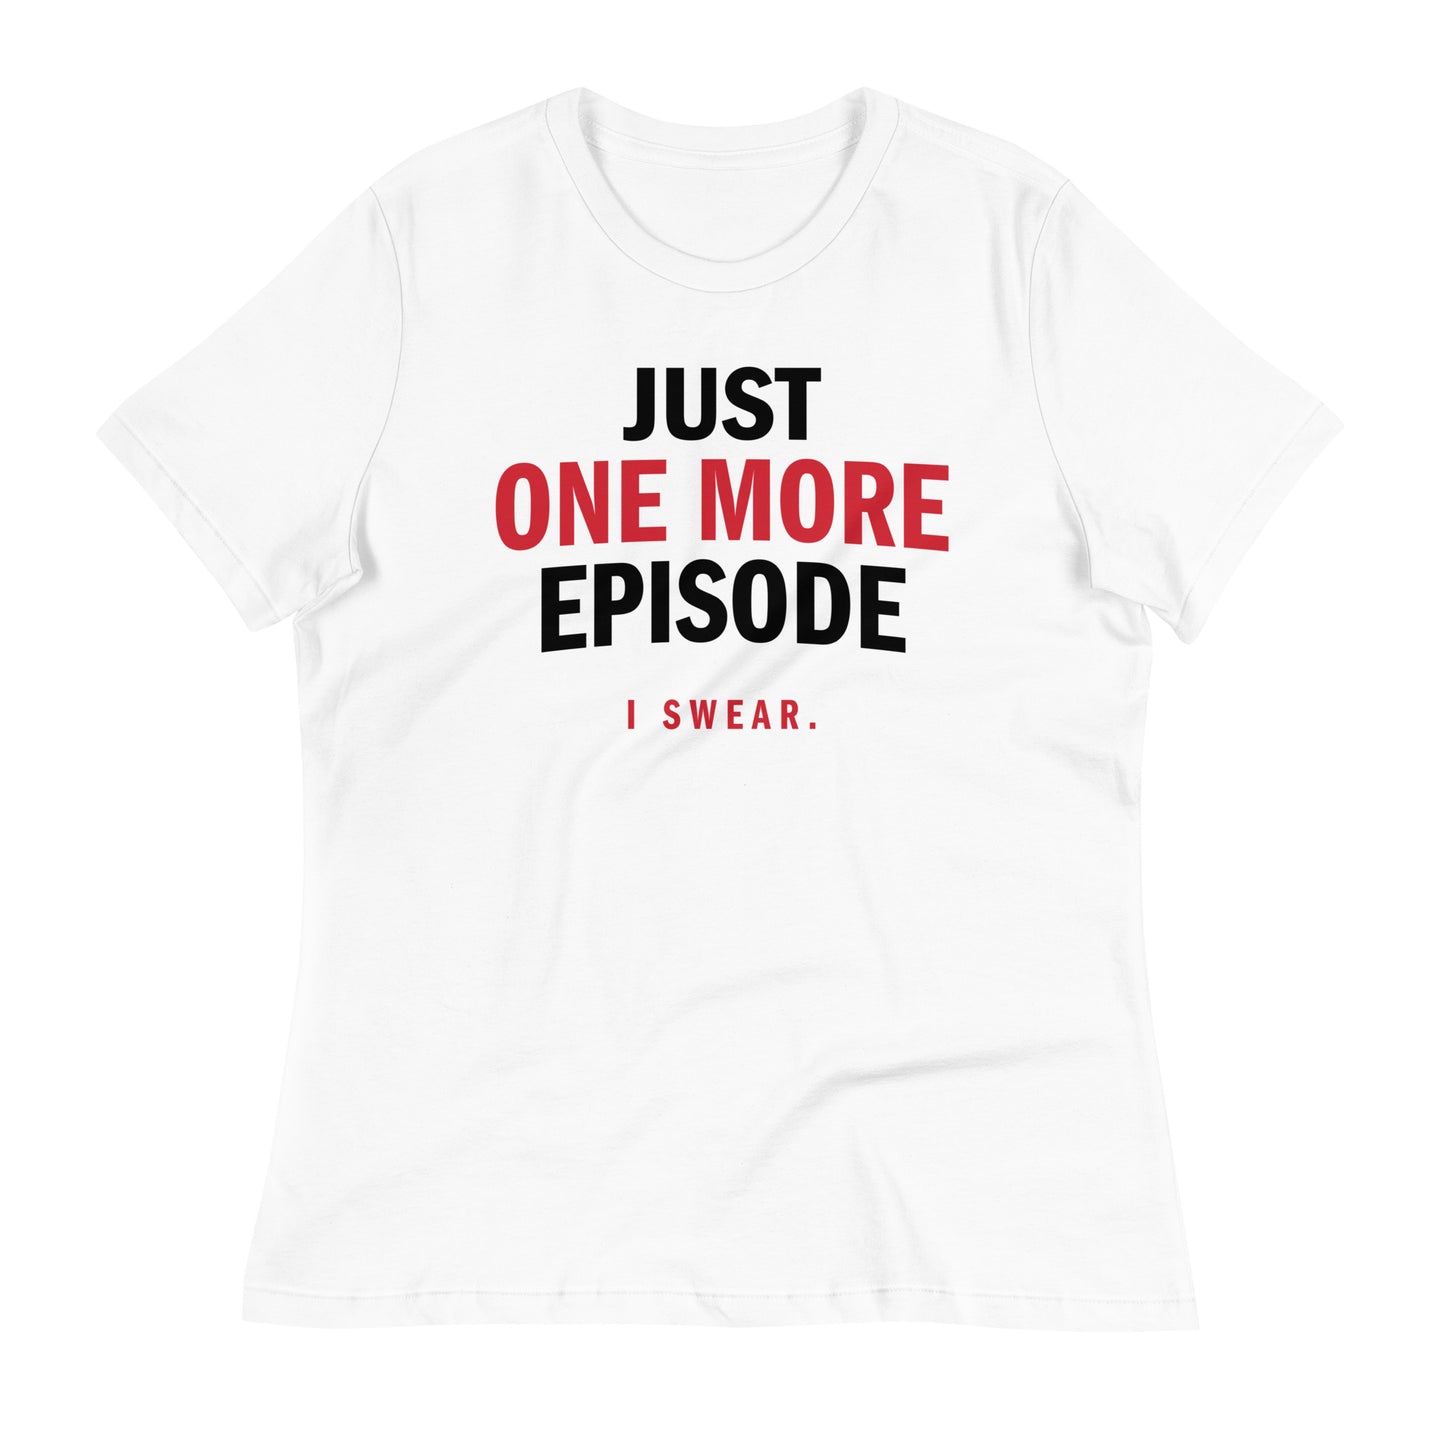 Just One More Episode Women's Signature Tee